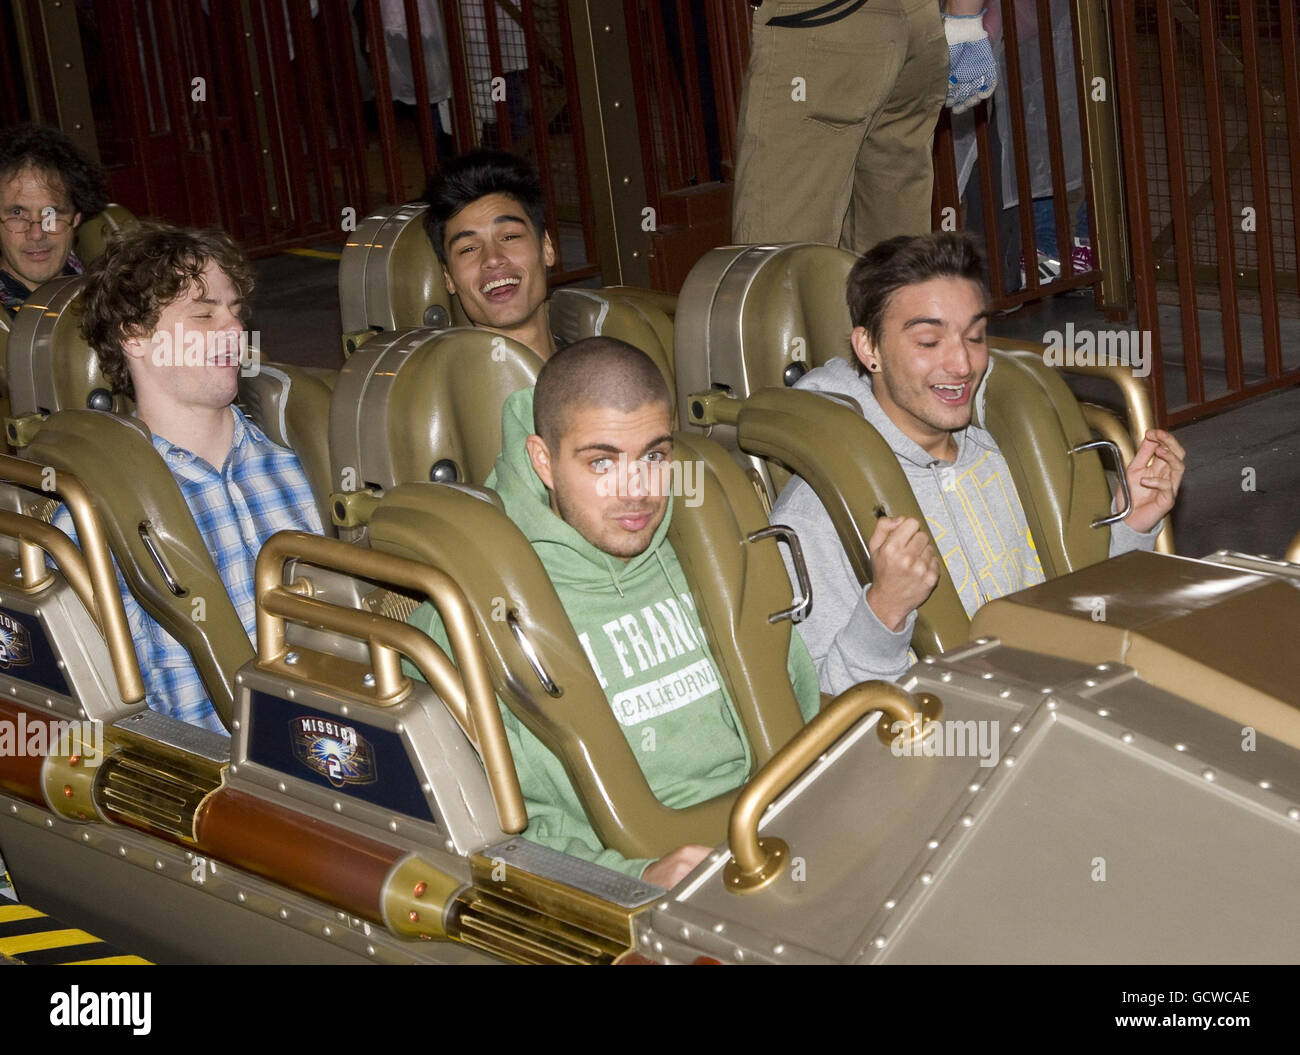 Wanted visit Disneyland Paris. The Wanted go on a ride during a visit to Disneyland Paris in France. Stock Photo